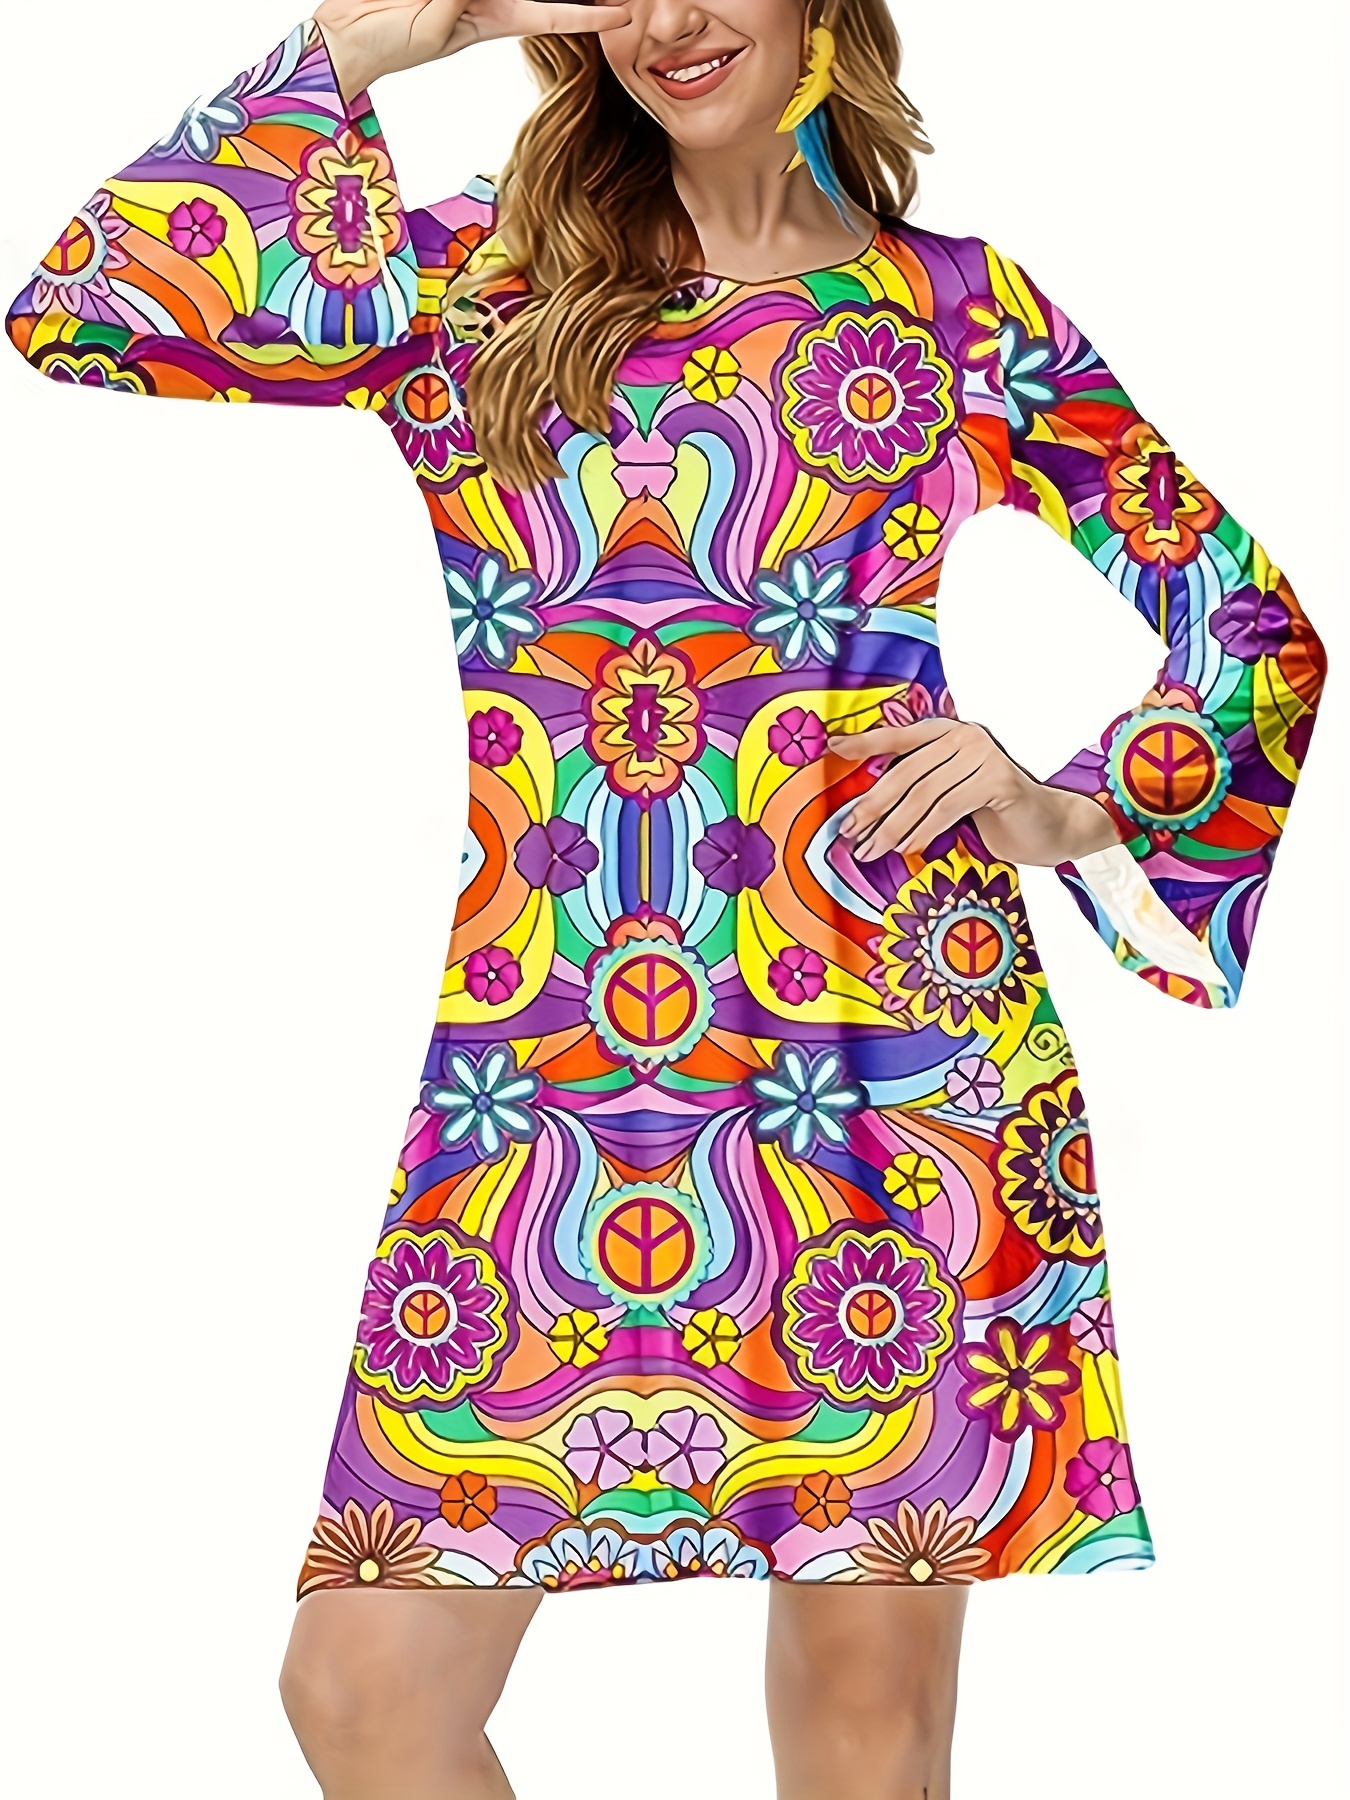 70s Hippie Halloween Costume Dress, Vintage Floral Flared Long